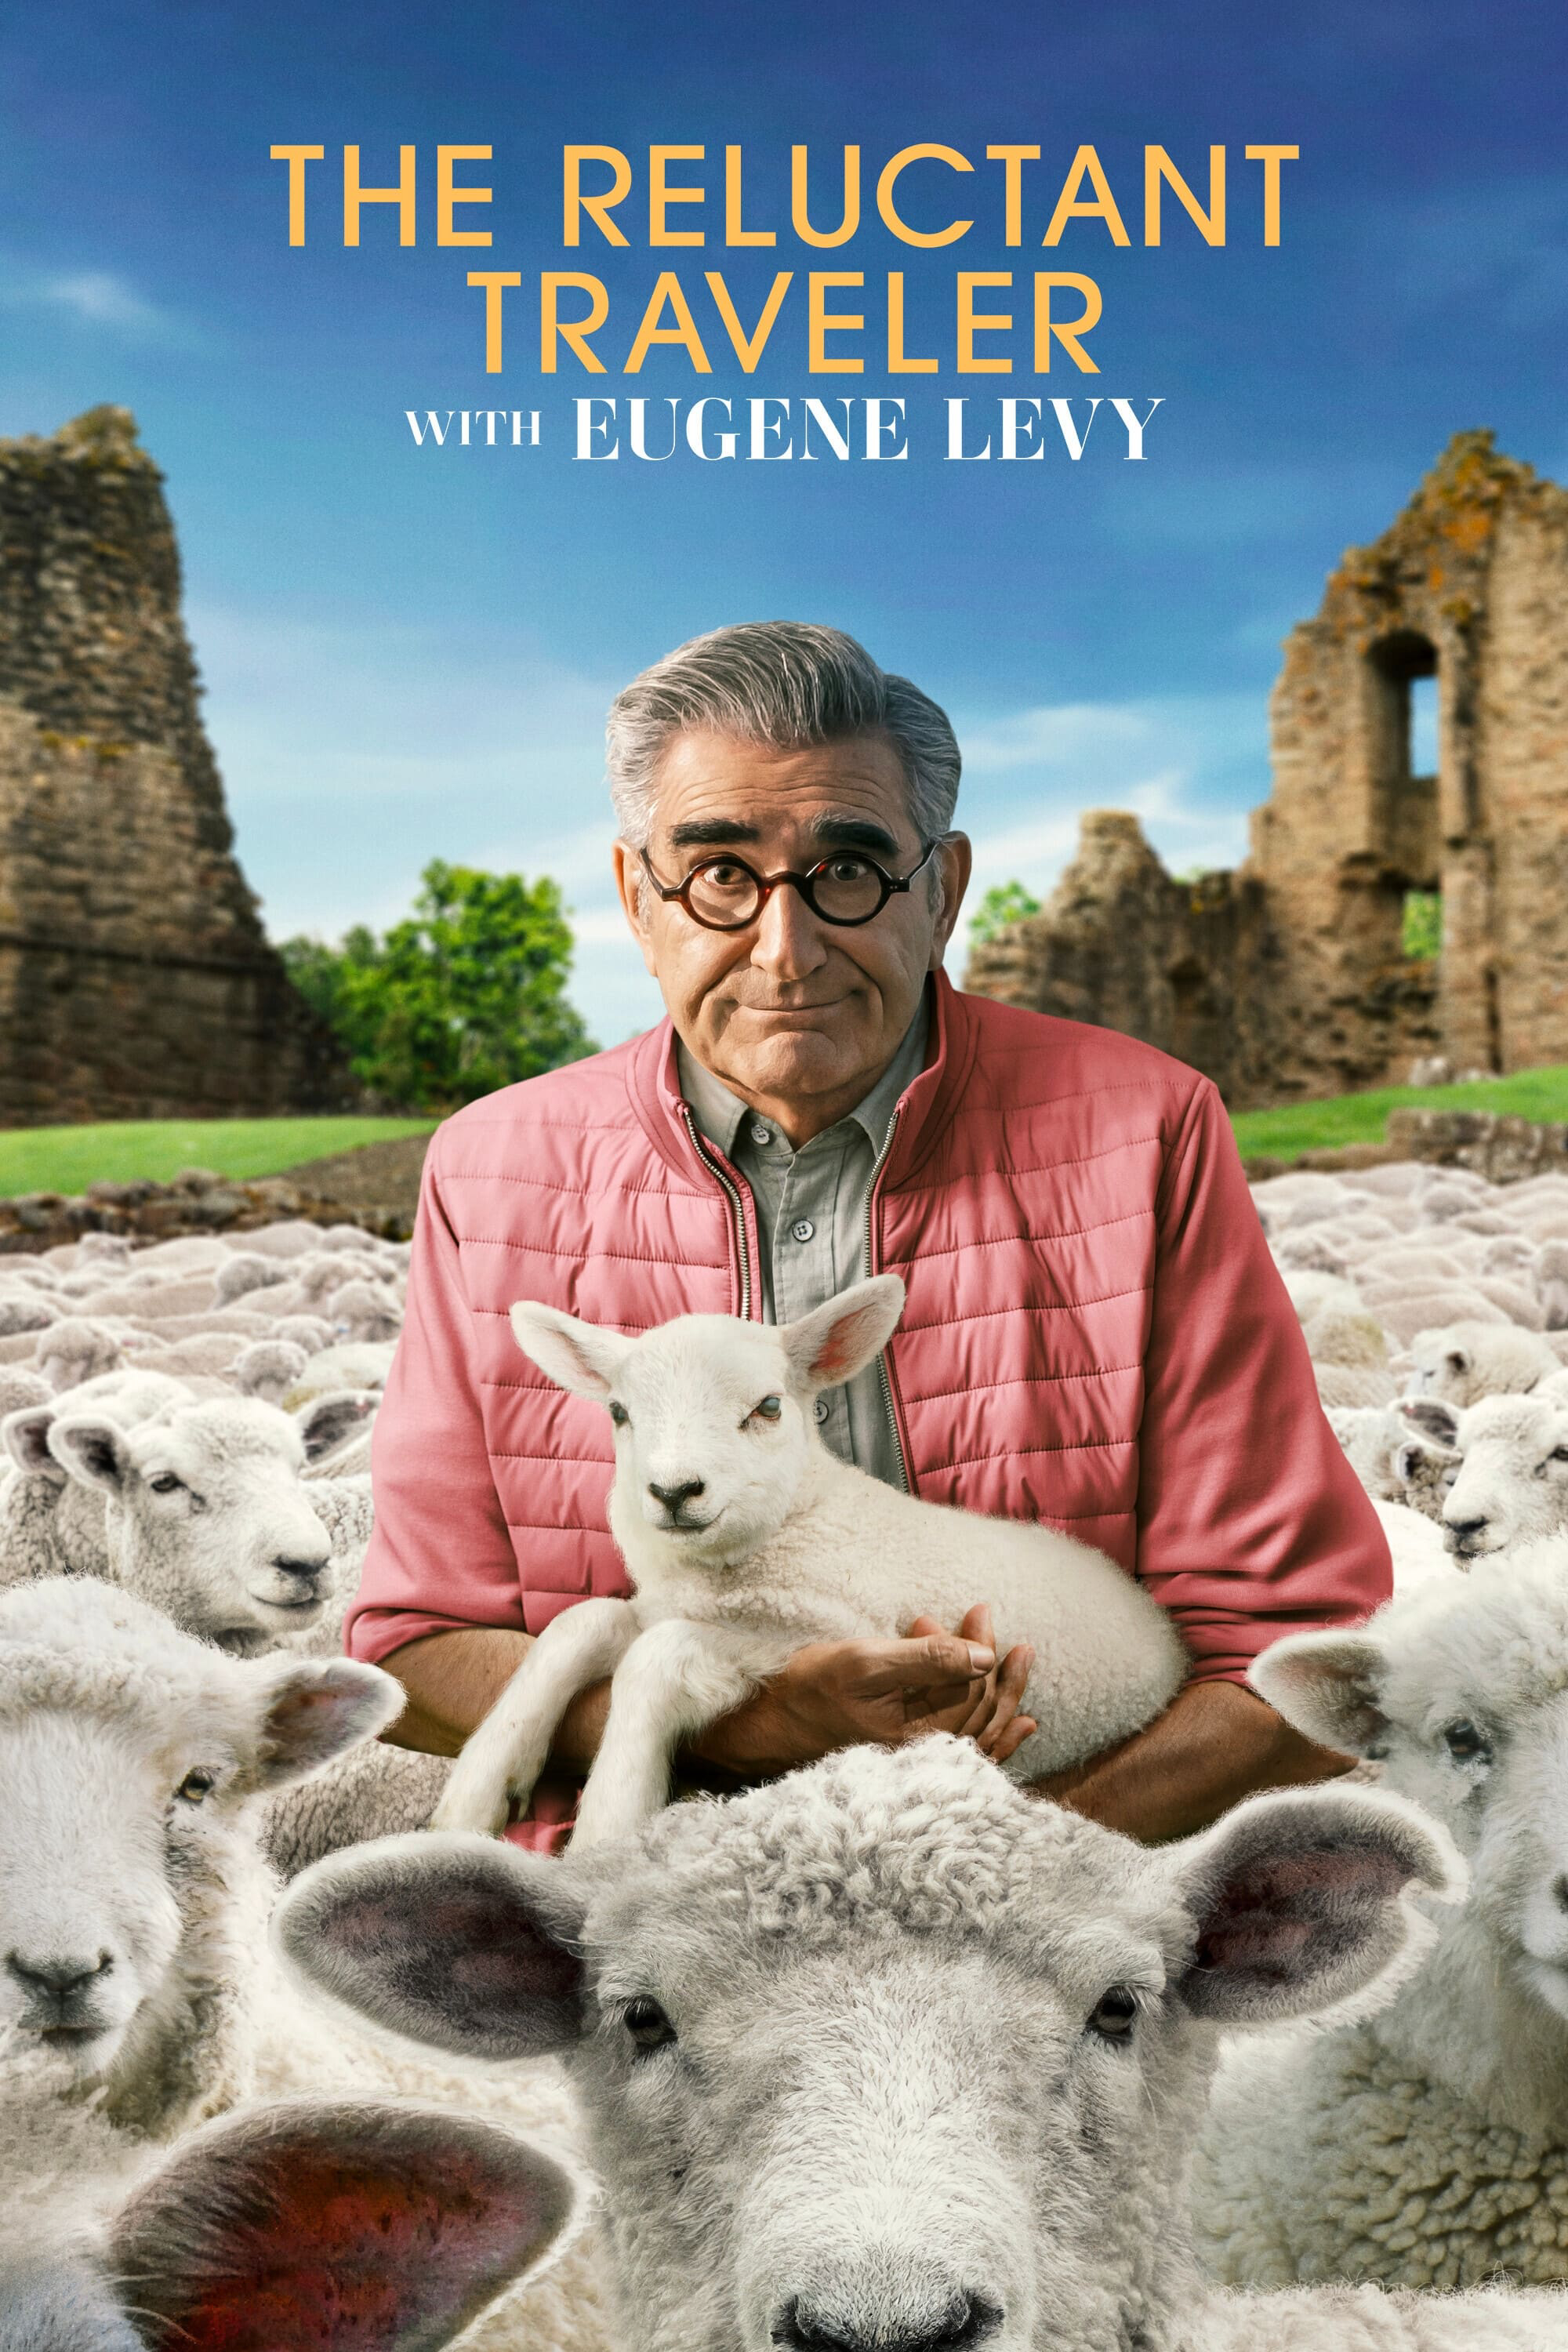 Poster Phim Eugene Levy, Vị Lữ Khách Miễn Cưỡng (Phần 2) (The Reluctant Traveler with Eugene Levy)